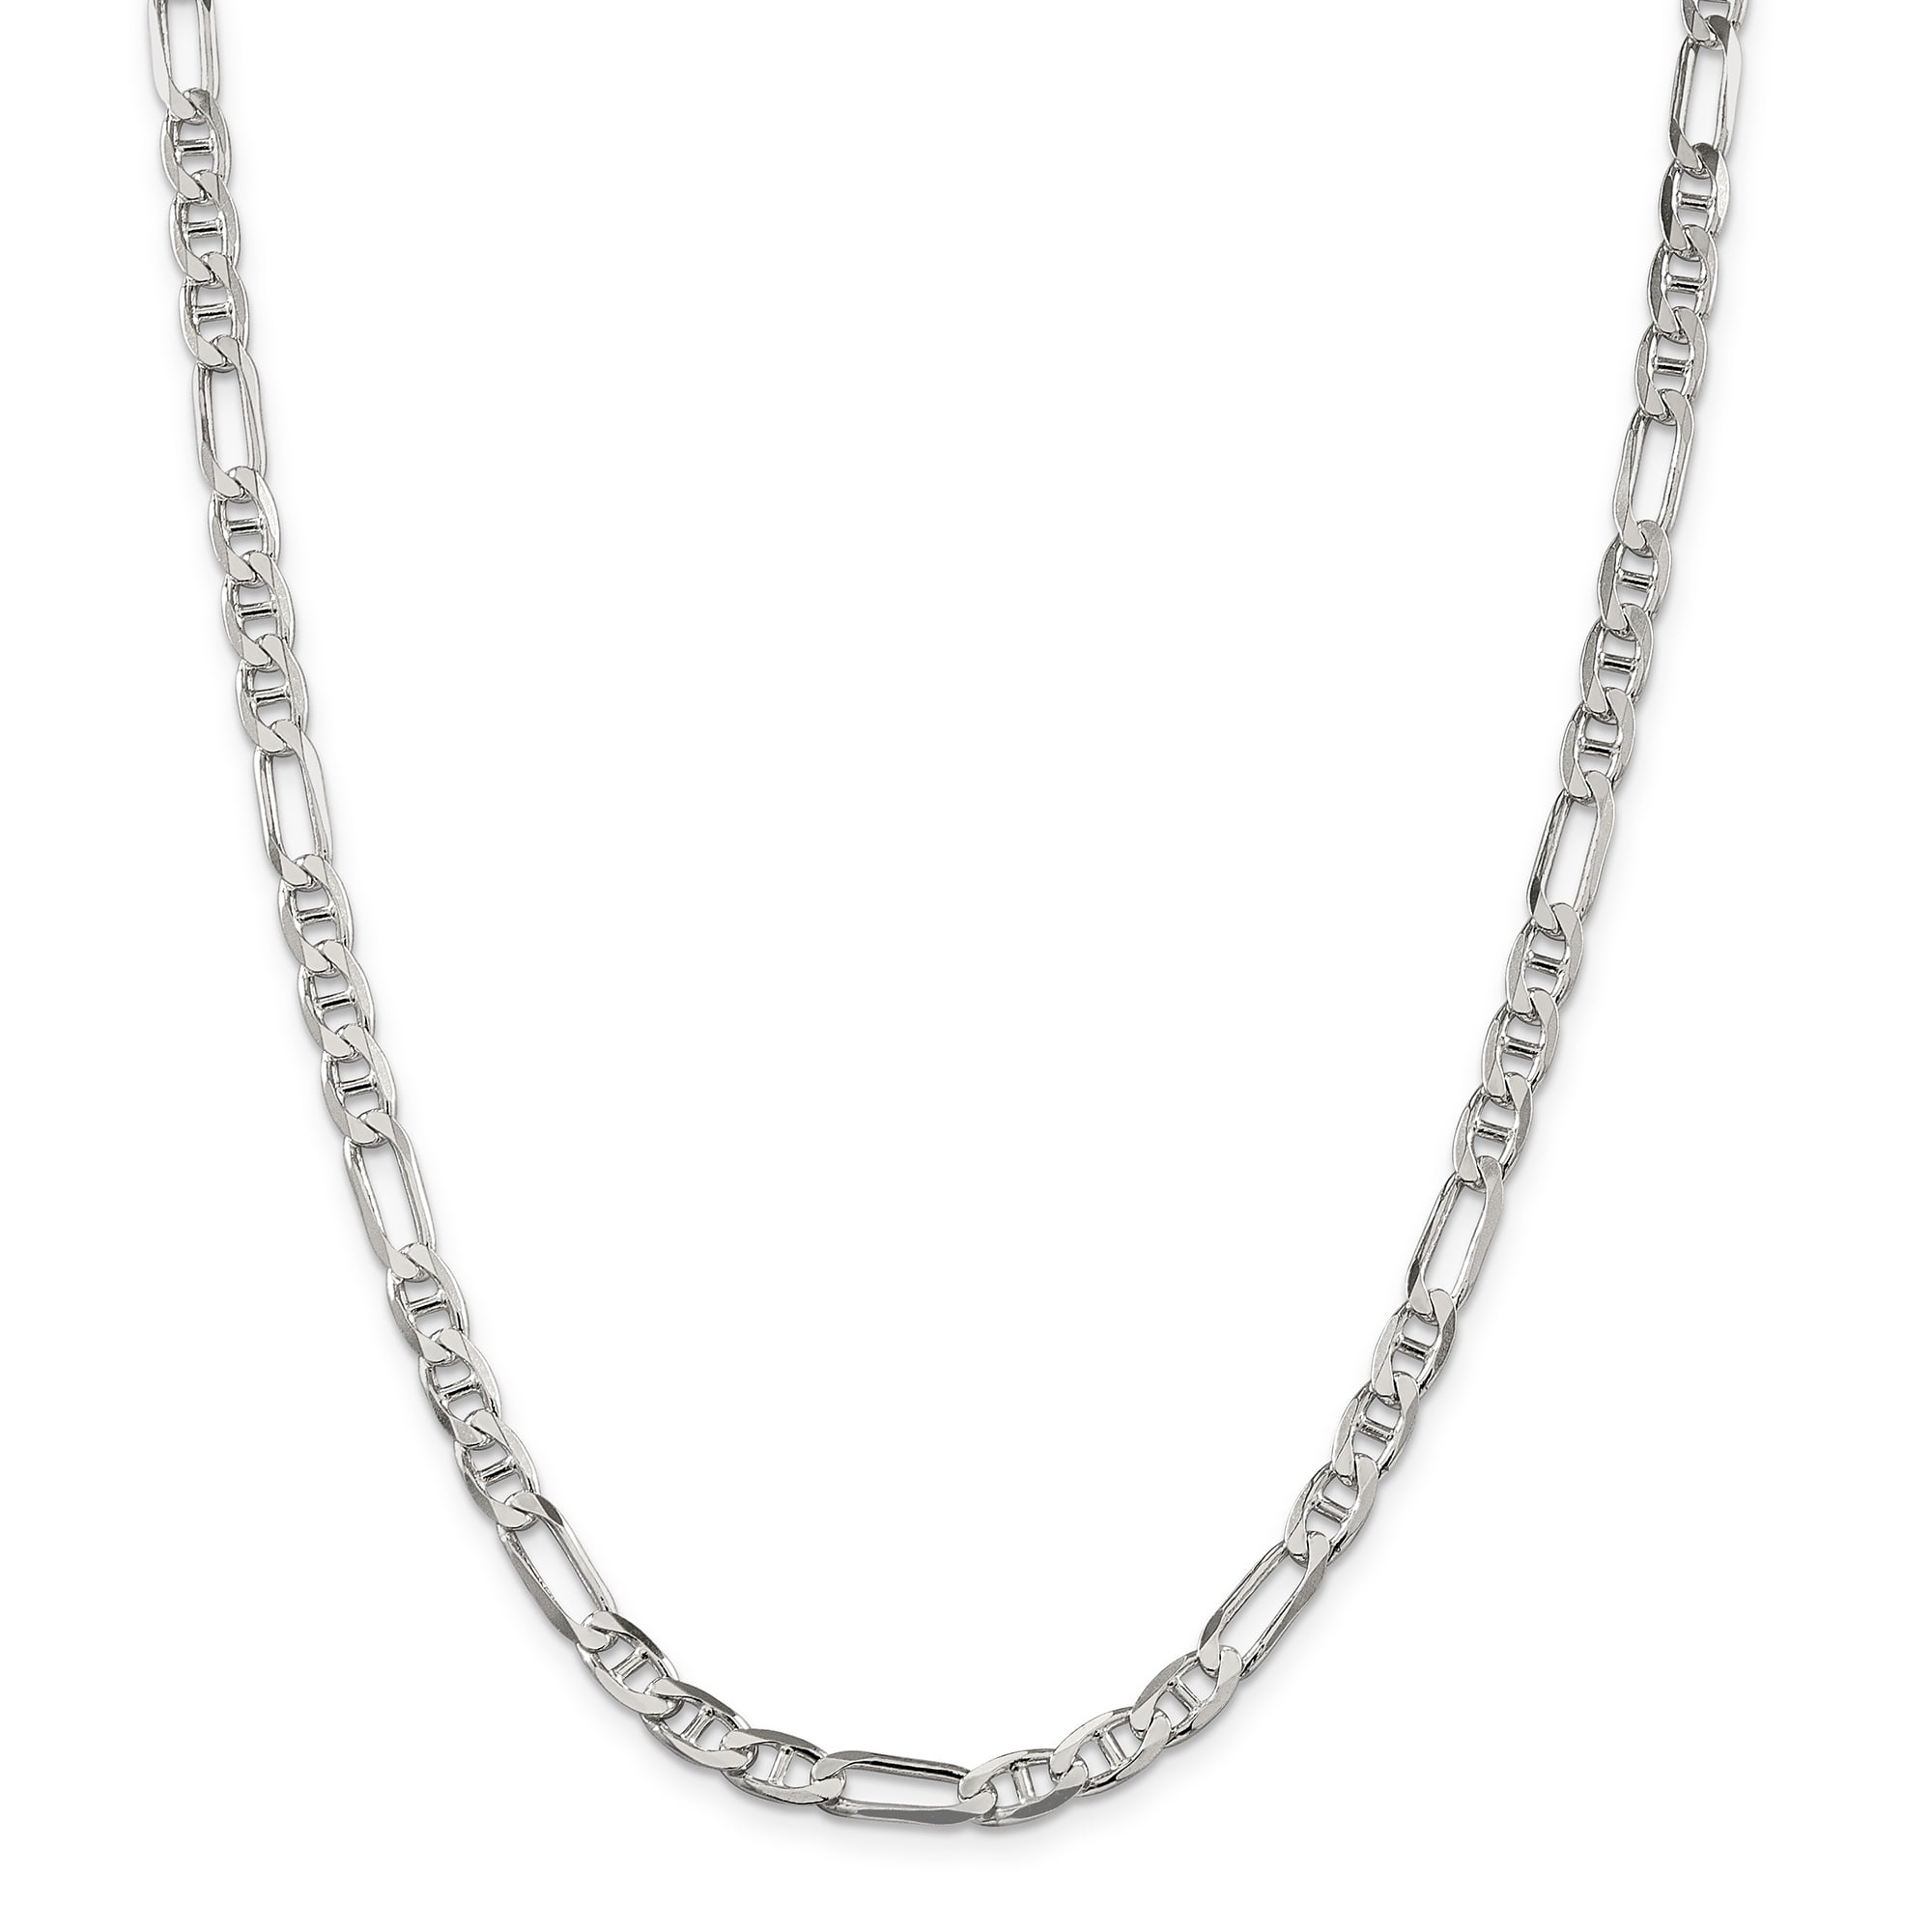 925 Sterling Silver Figaro Anchor Chain Necklace 